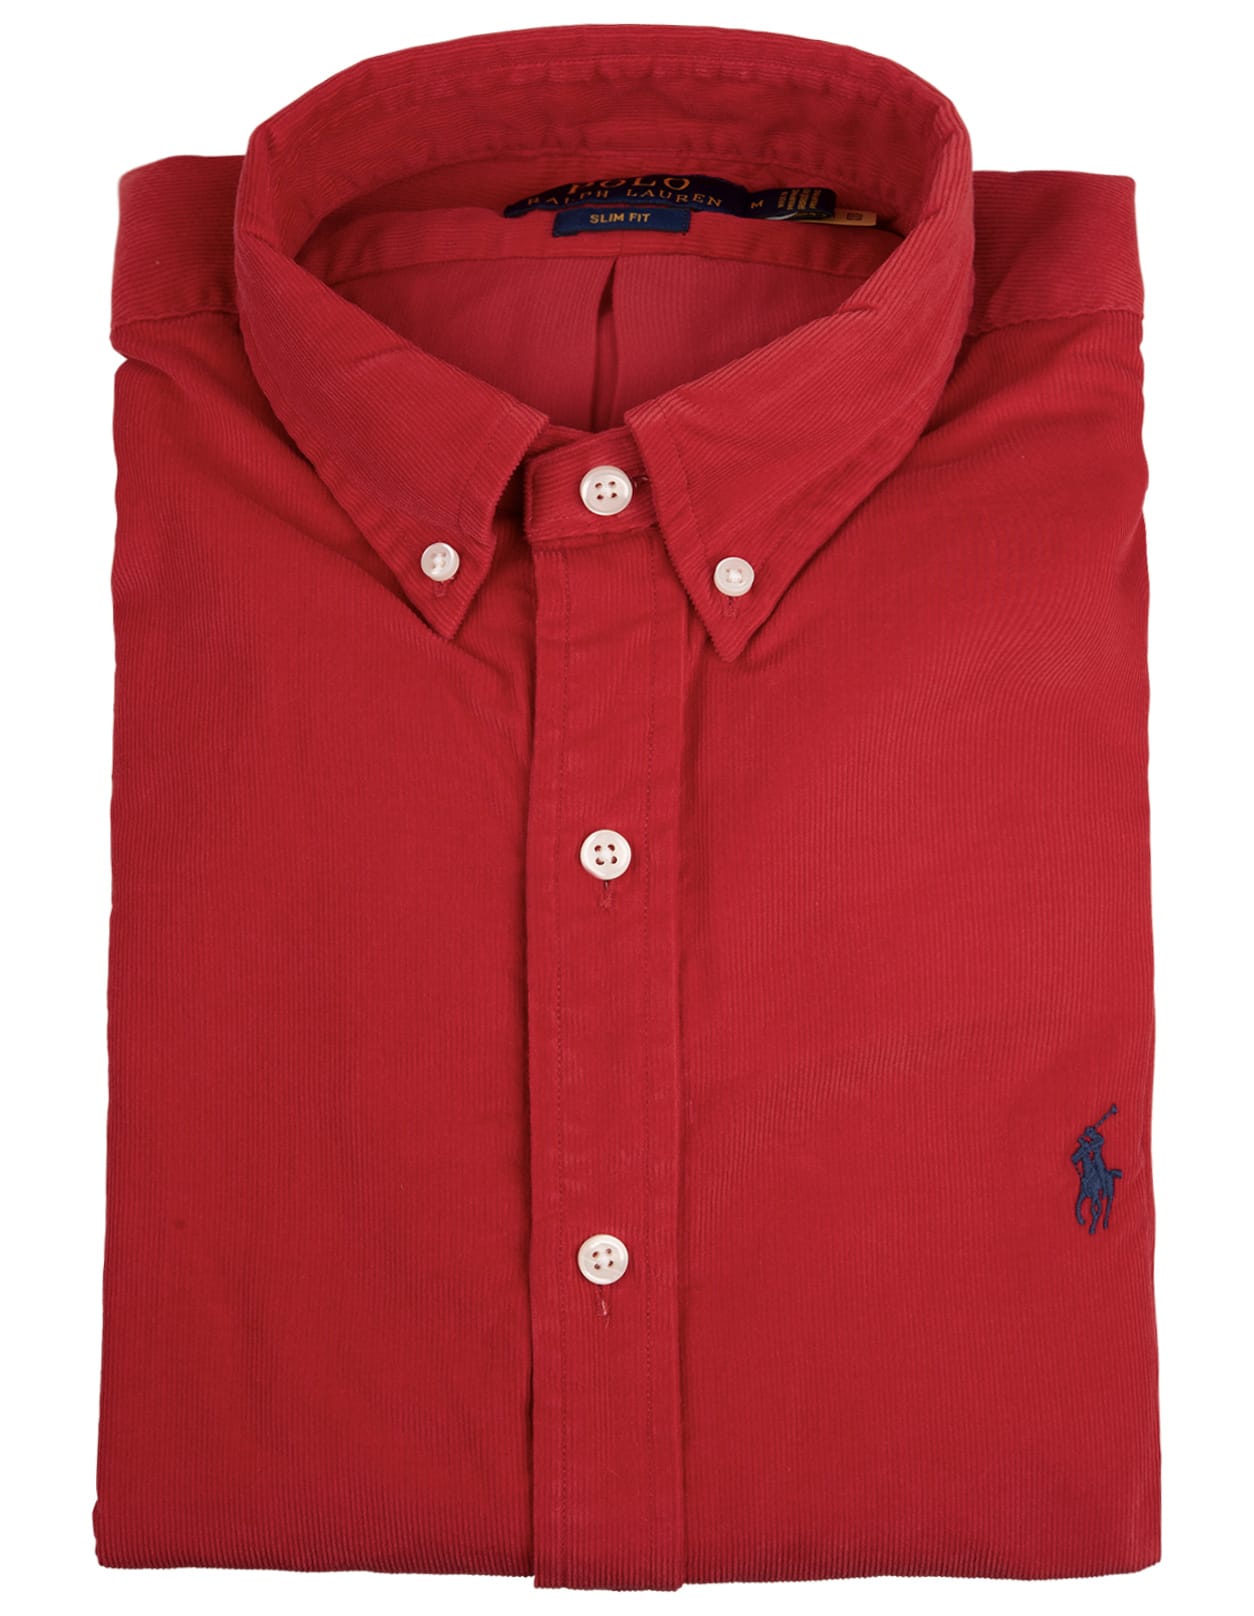 Ralph Lauren Man Slim Fit Shirt In Red Fustian With Contrast Pony